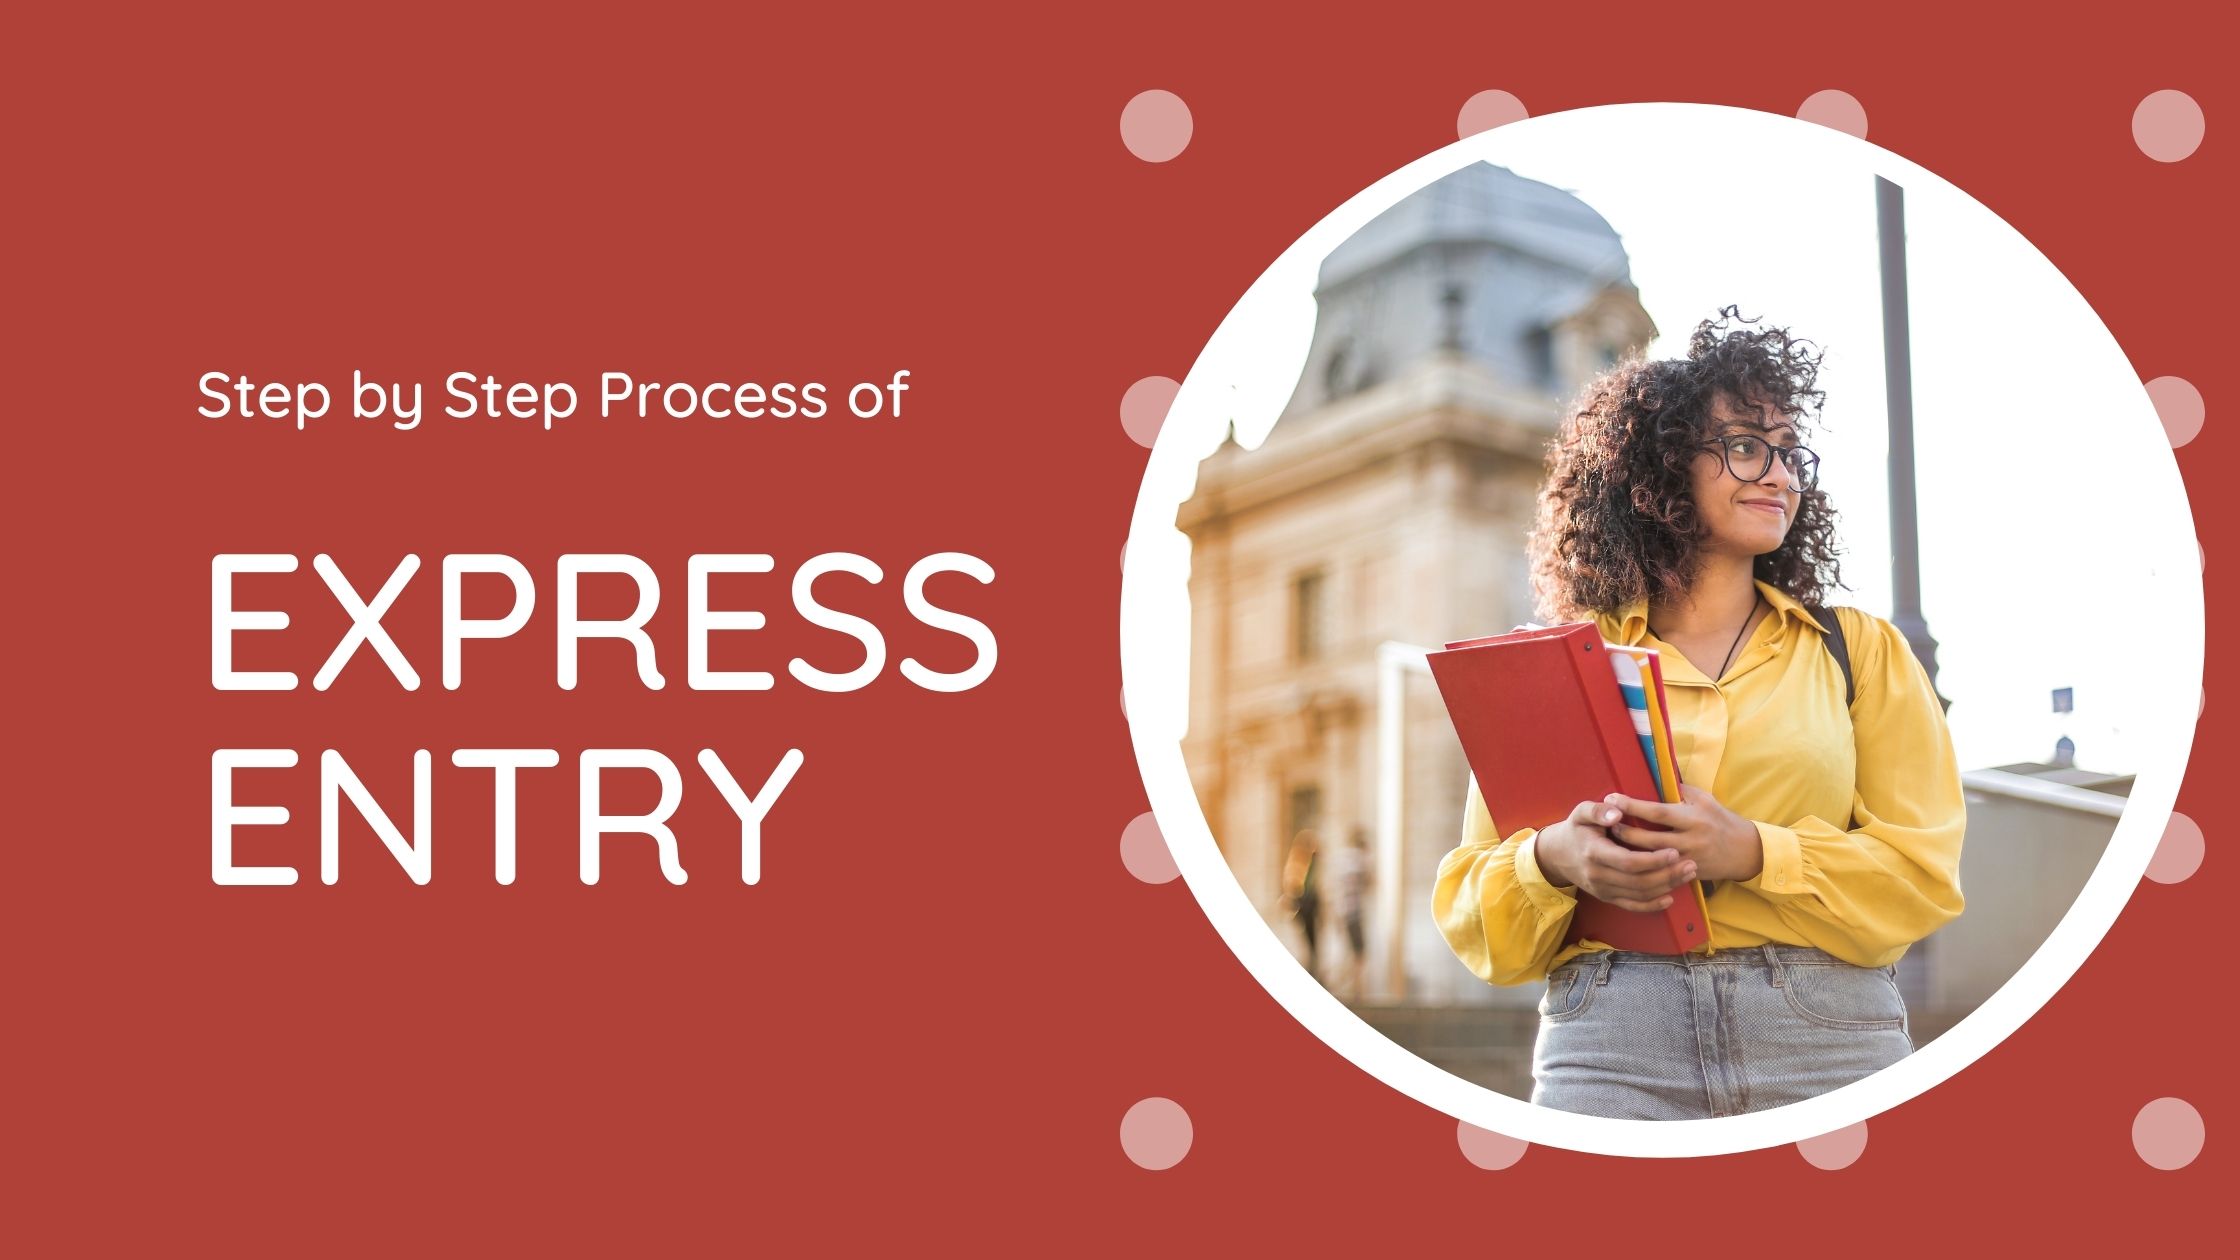 Step by Step Process of Express Entry System in Canada